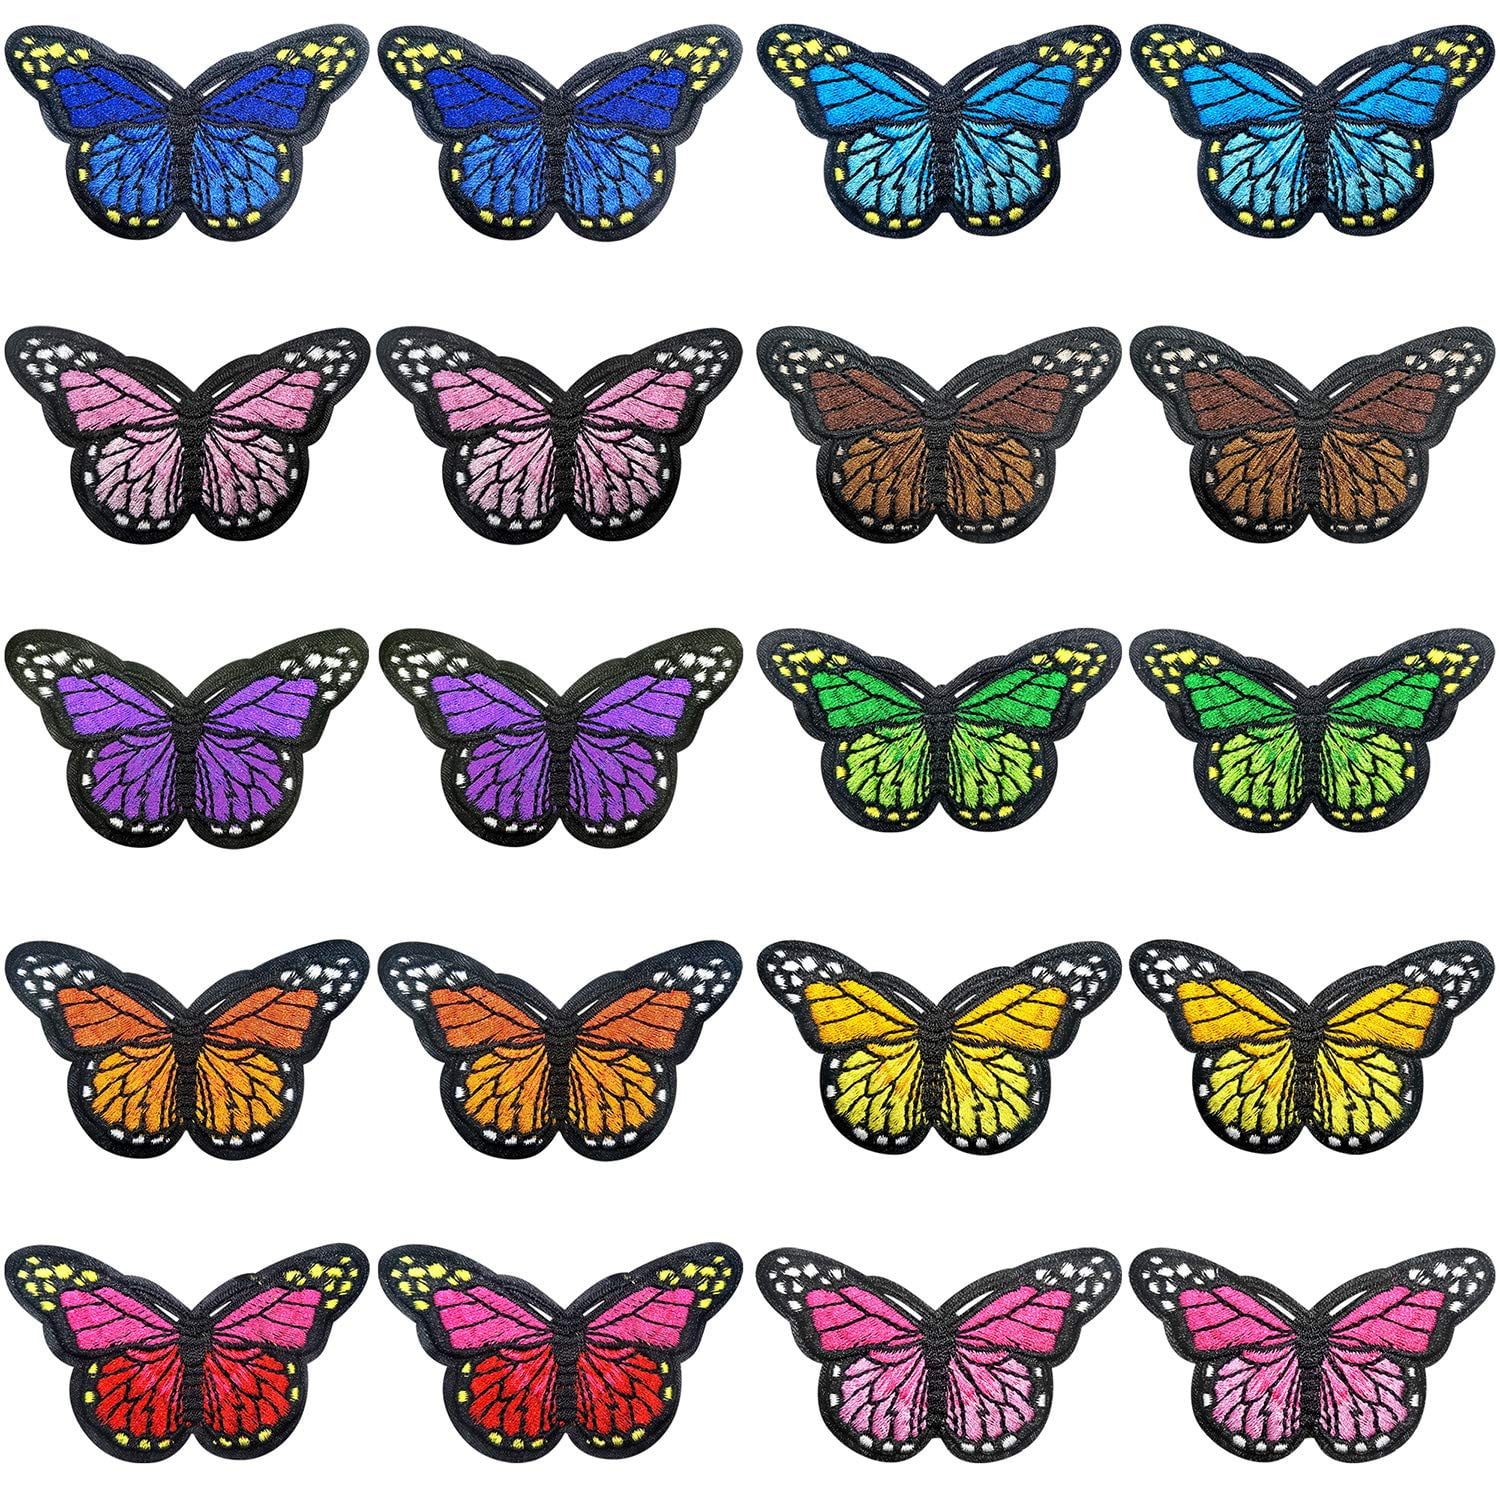 Butterfly Pattern Embroidery Patches Motifs Iron On Clothing Patch Decor 